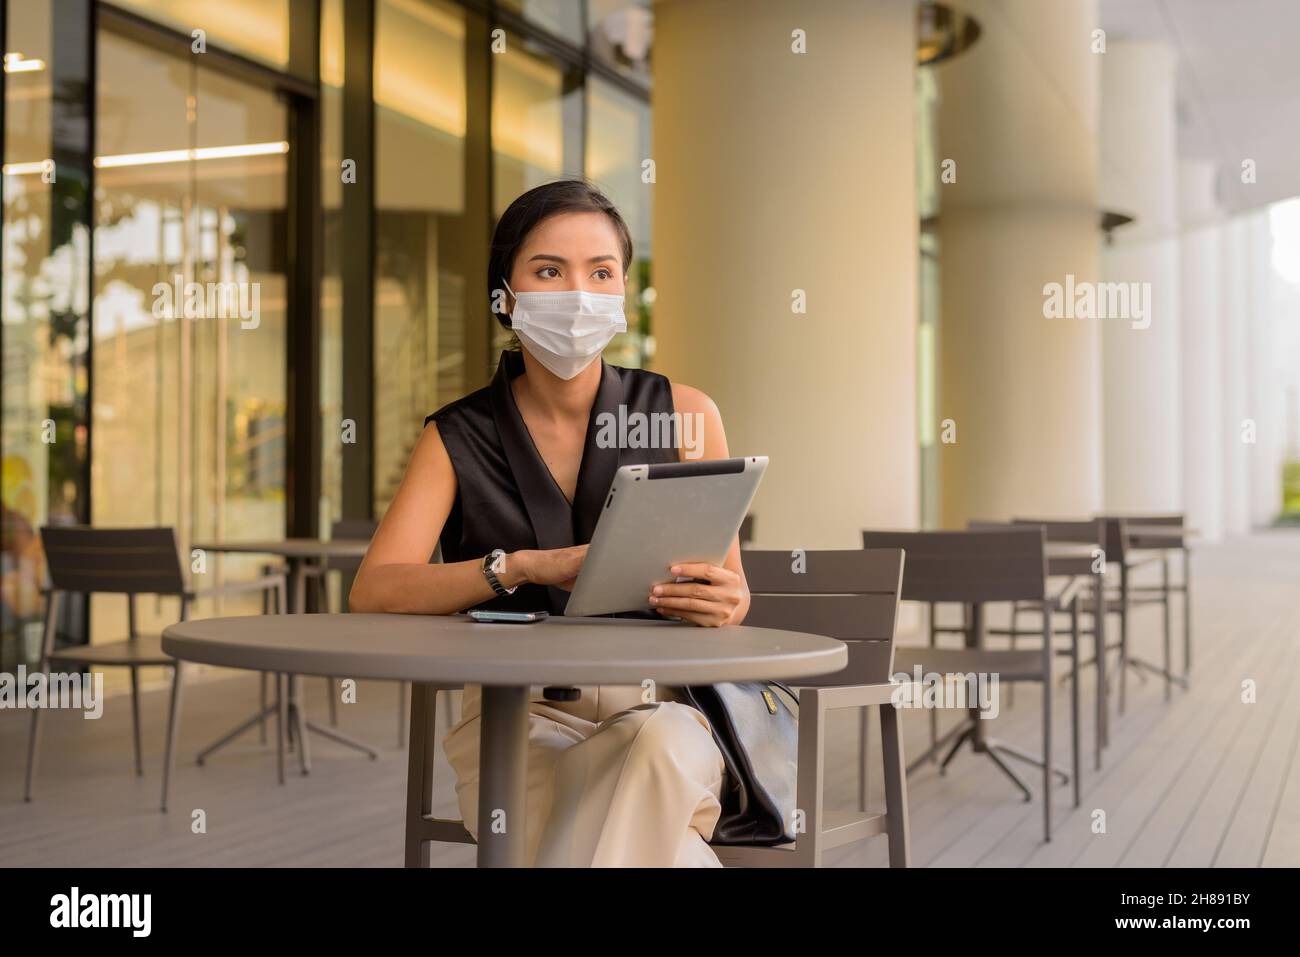 Woman sitting outdoors at coffee shop restaurant social distancing and wearing face mask to protect from covid 19 while using phone and digital tablet Stock Photo